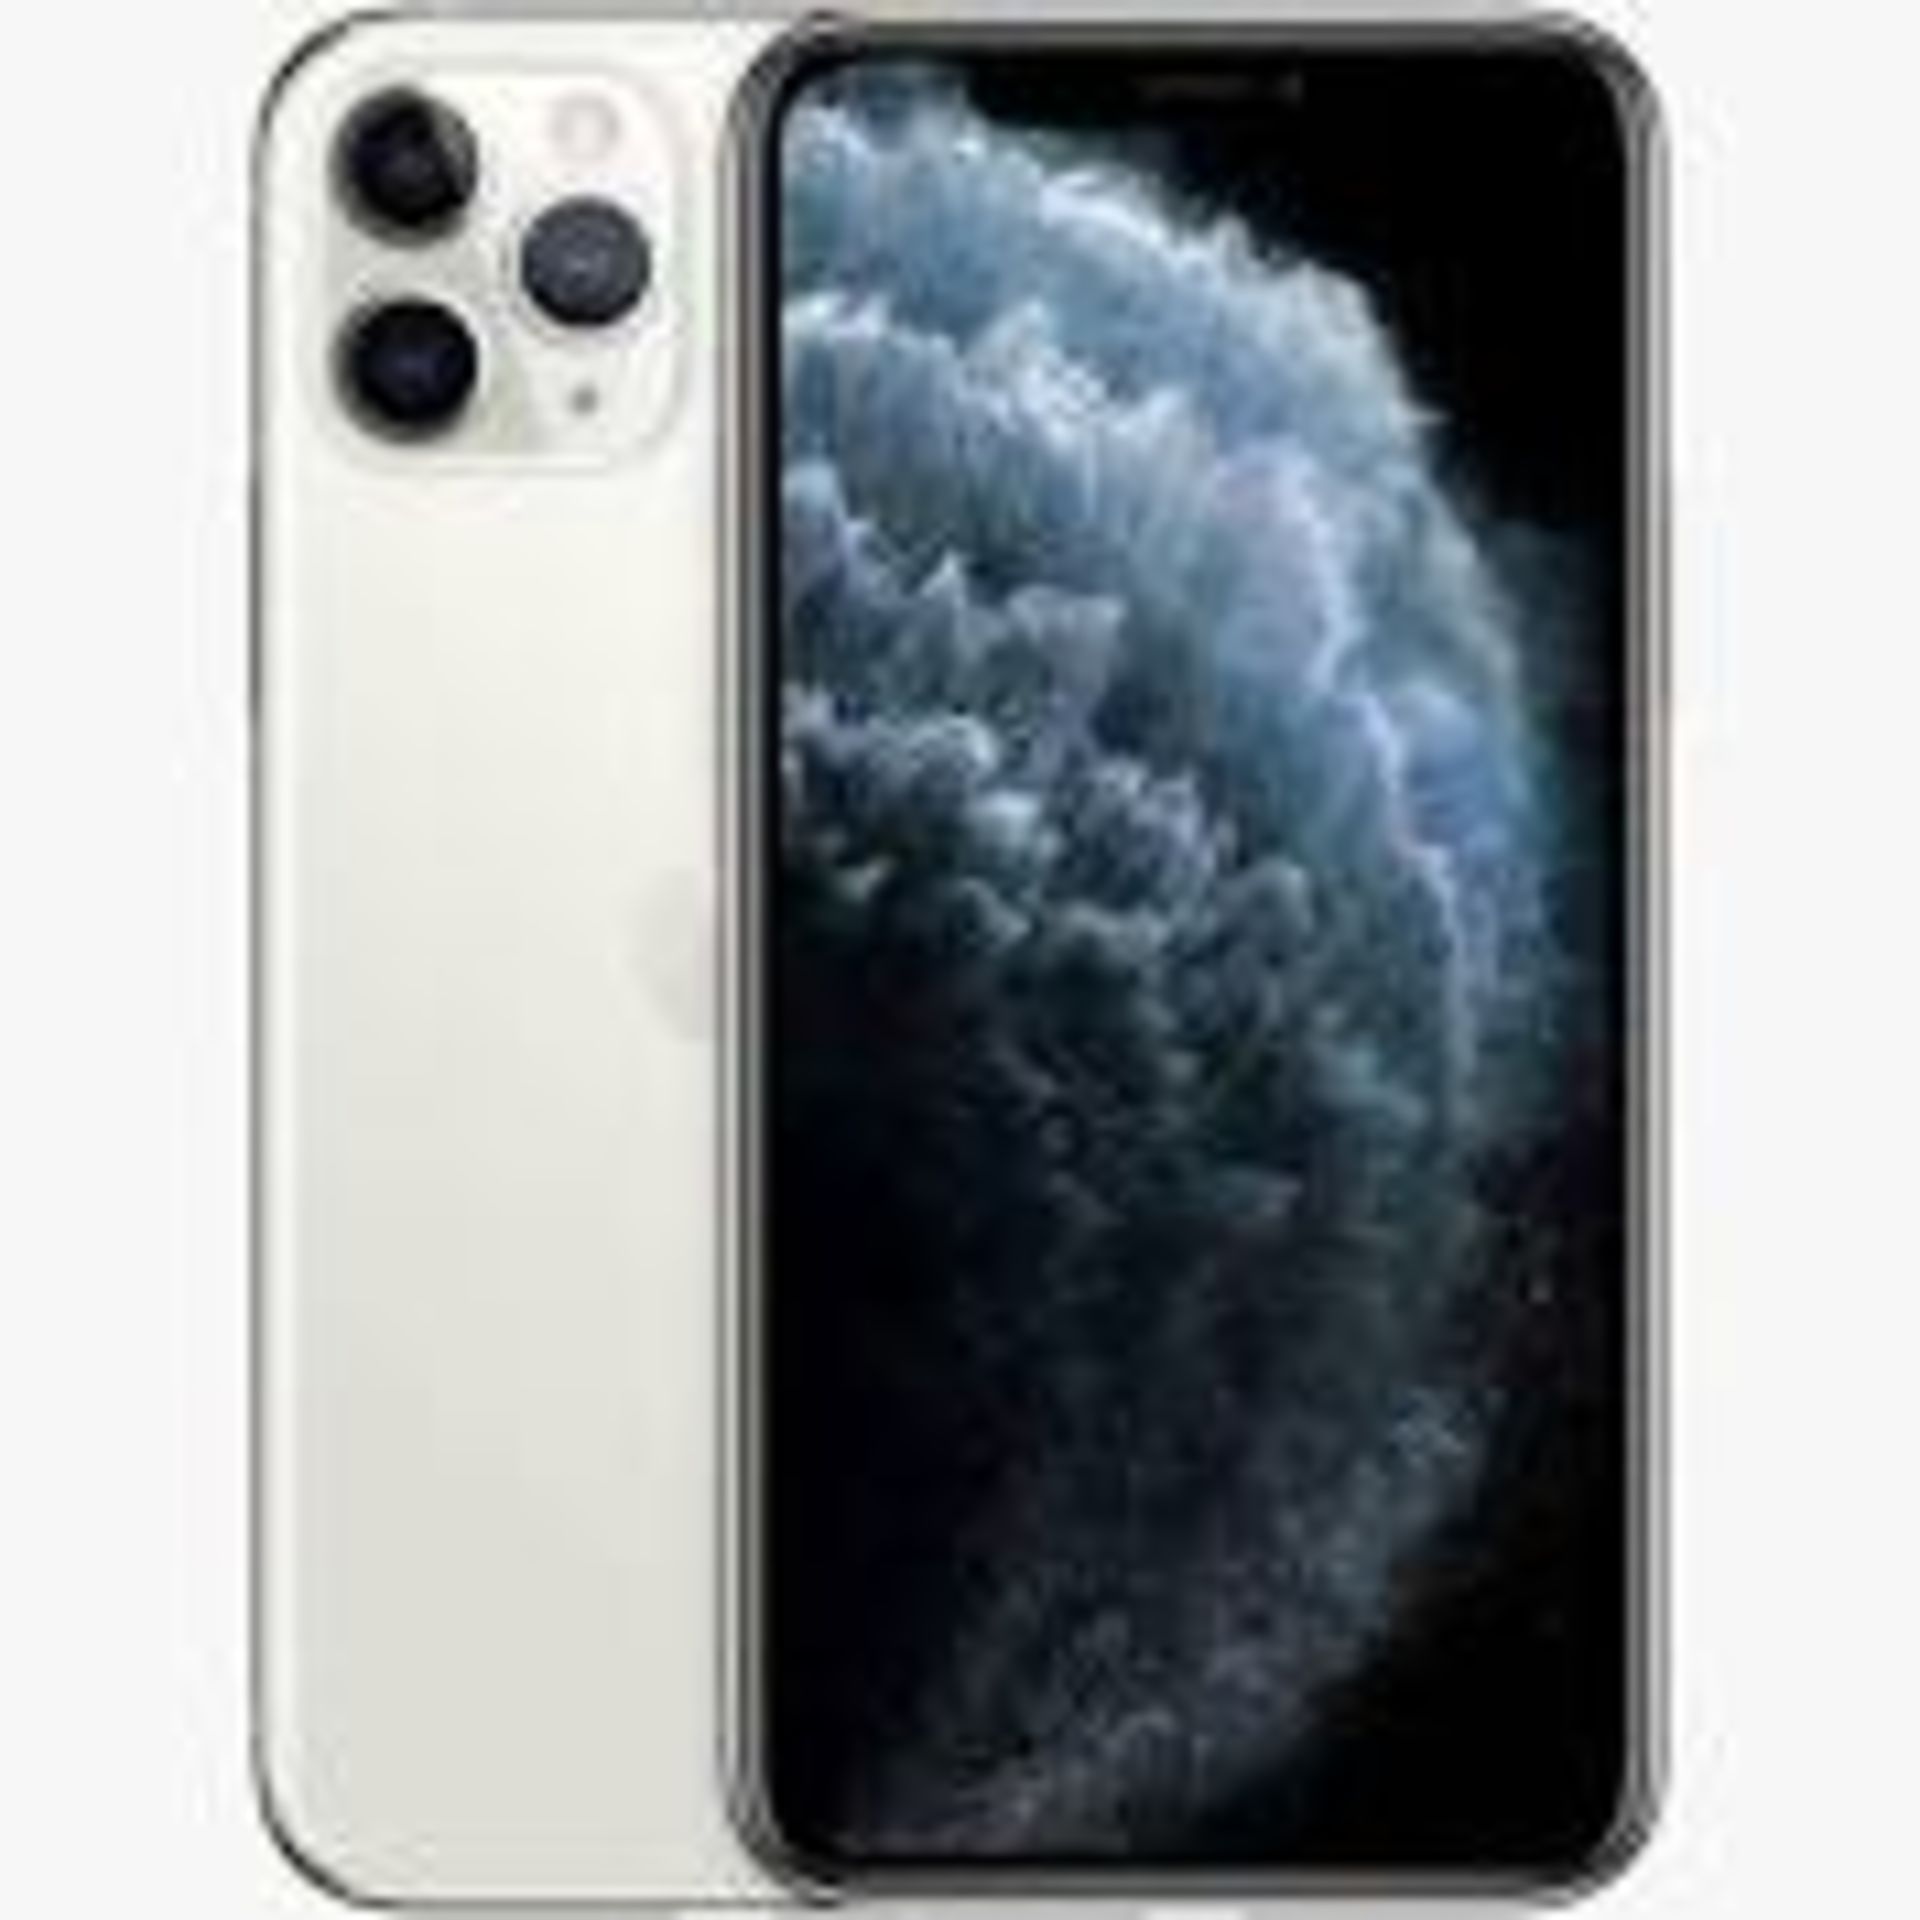 RRP £1,199 Apple iPhone 11 Pro 256GB Silver, Grade A (Appraisals Available Upon Request) (Pictures